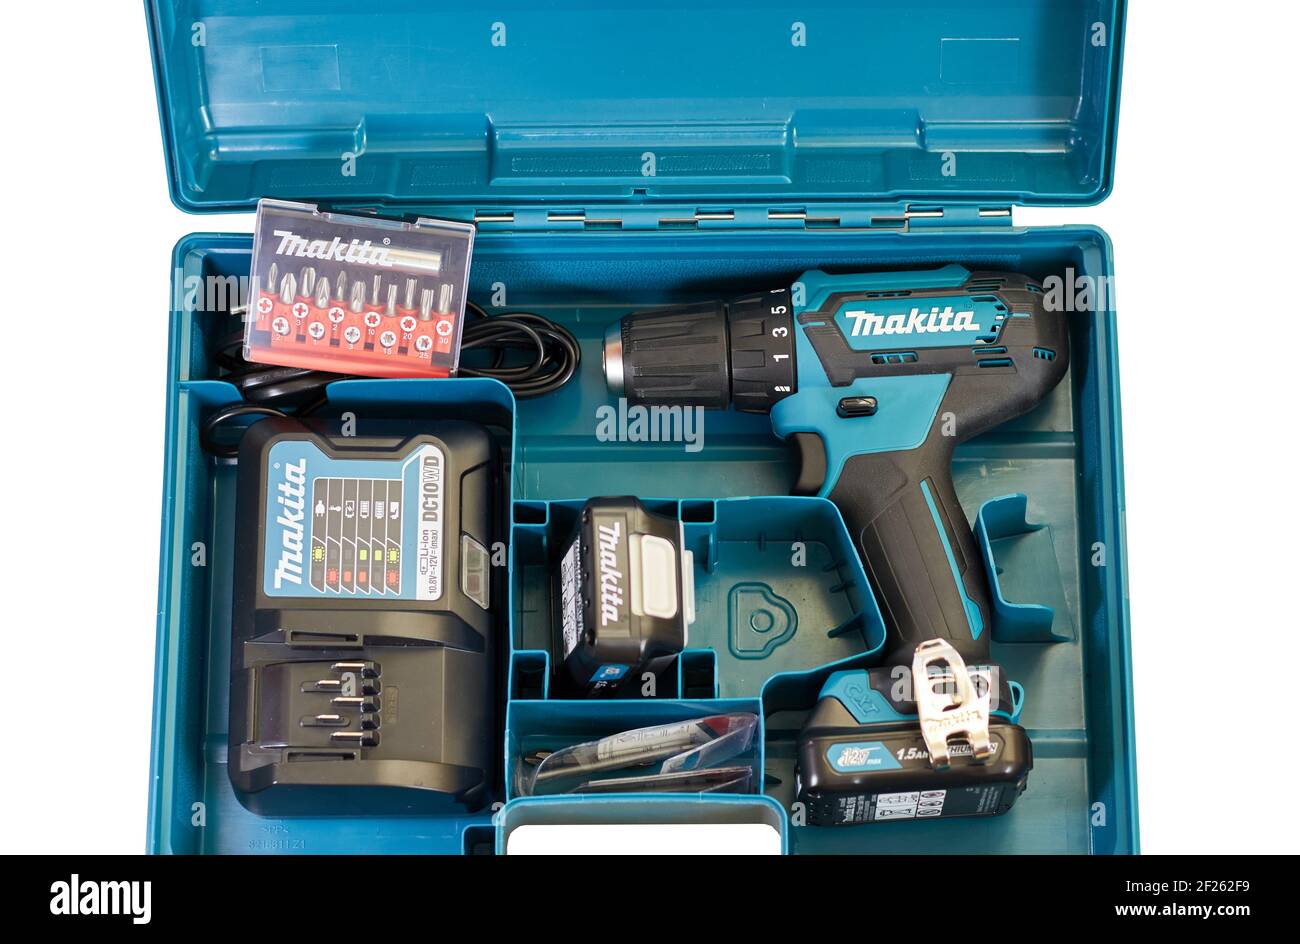 Grodno, Belarus- 01.22.2021: Makita screwdriver Box with charging, battery  and bit Sets Stock Photo - Alamy